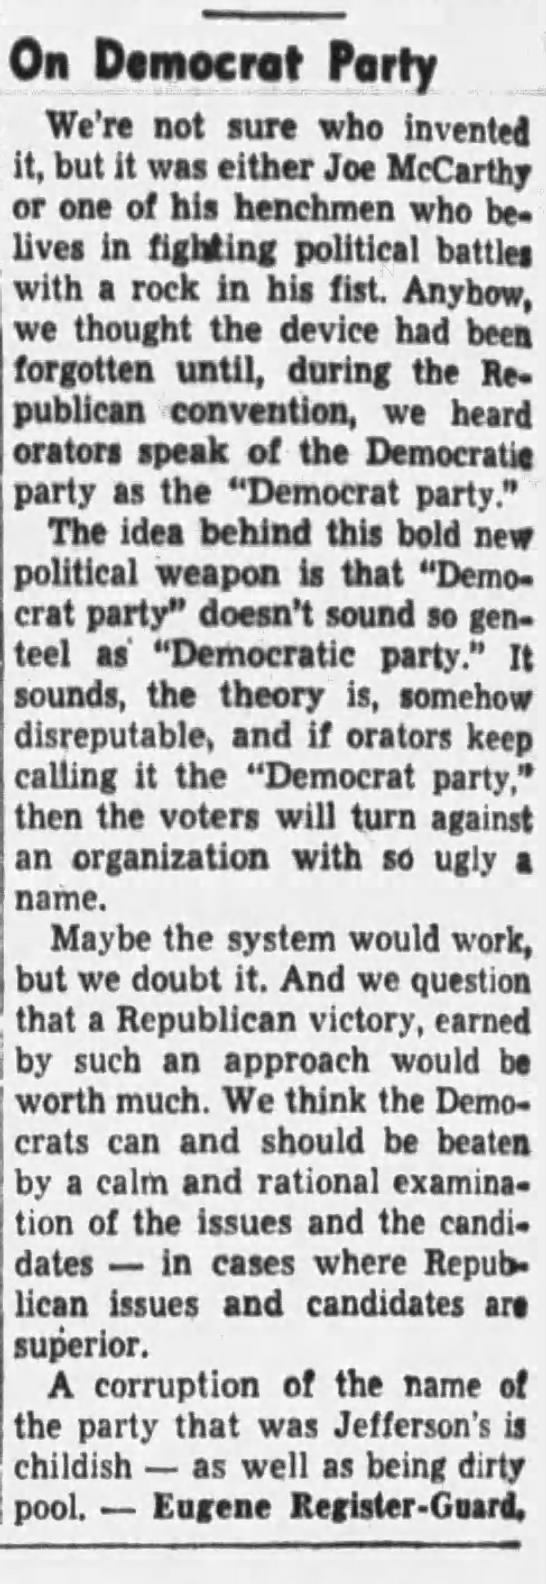 WE are not sure who invented Democrat Party but it was either Joe McCarthy or someone else, 1956 - 